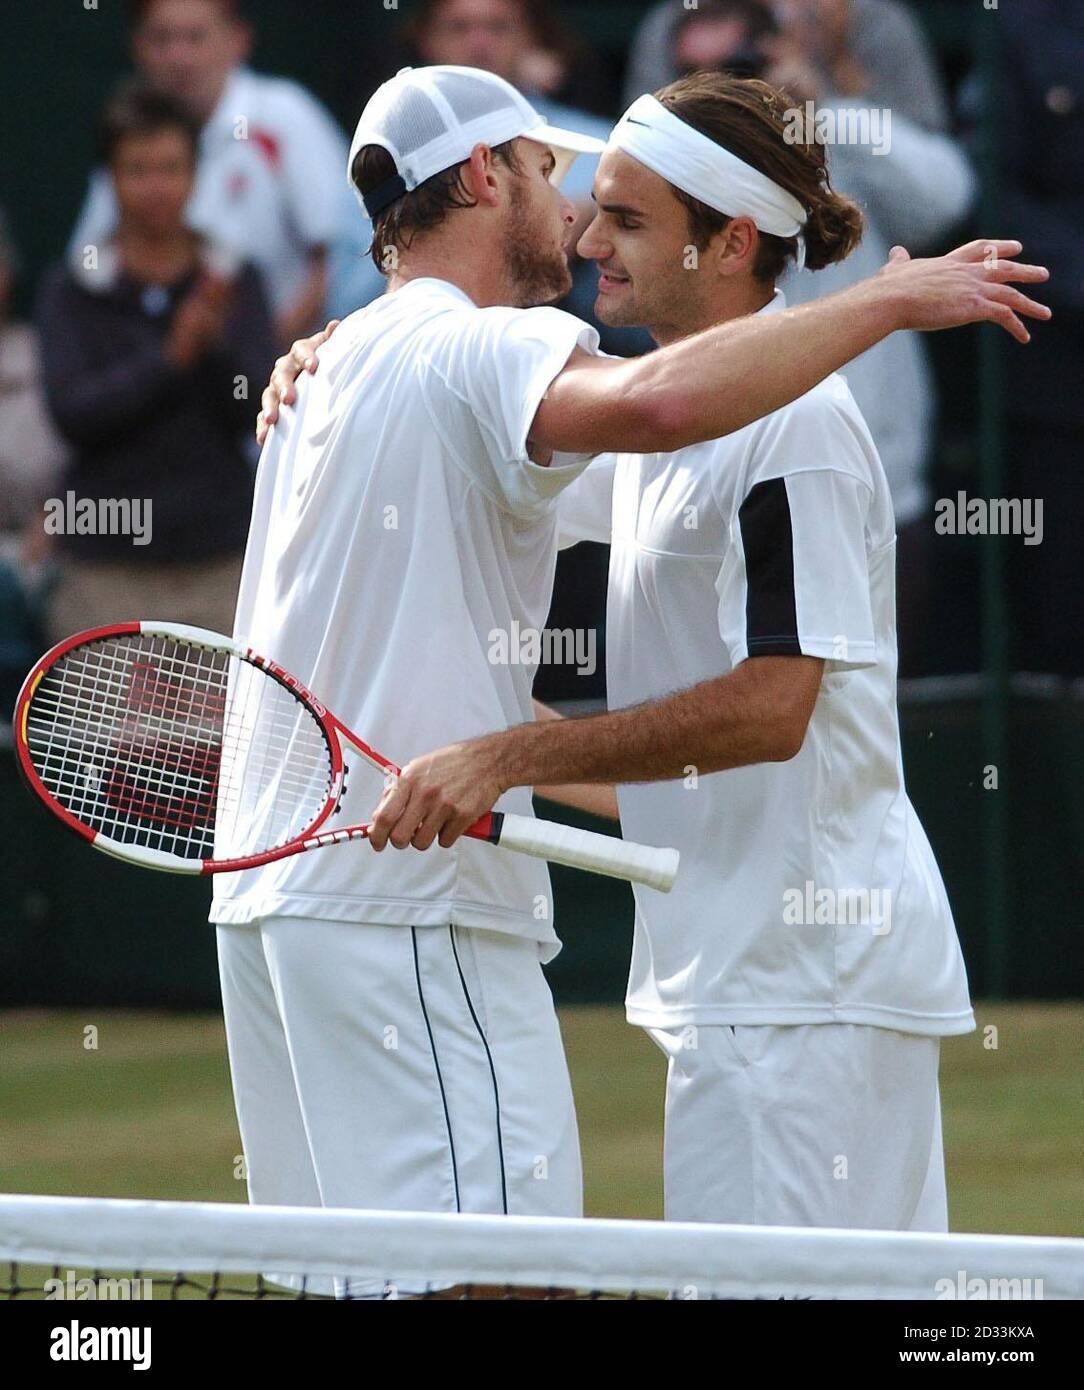 Roger Federer from Switzerland (right) and Andy Roddick from the USA  embrace after the final of the Men's Singles tournament at The Lawn tennis  Championships at Wimbledon, London. Final score 4:6/7:5/7:6/6:4 to